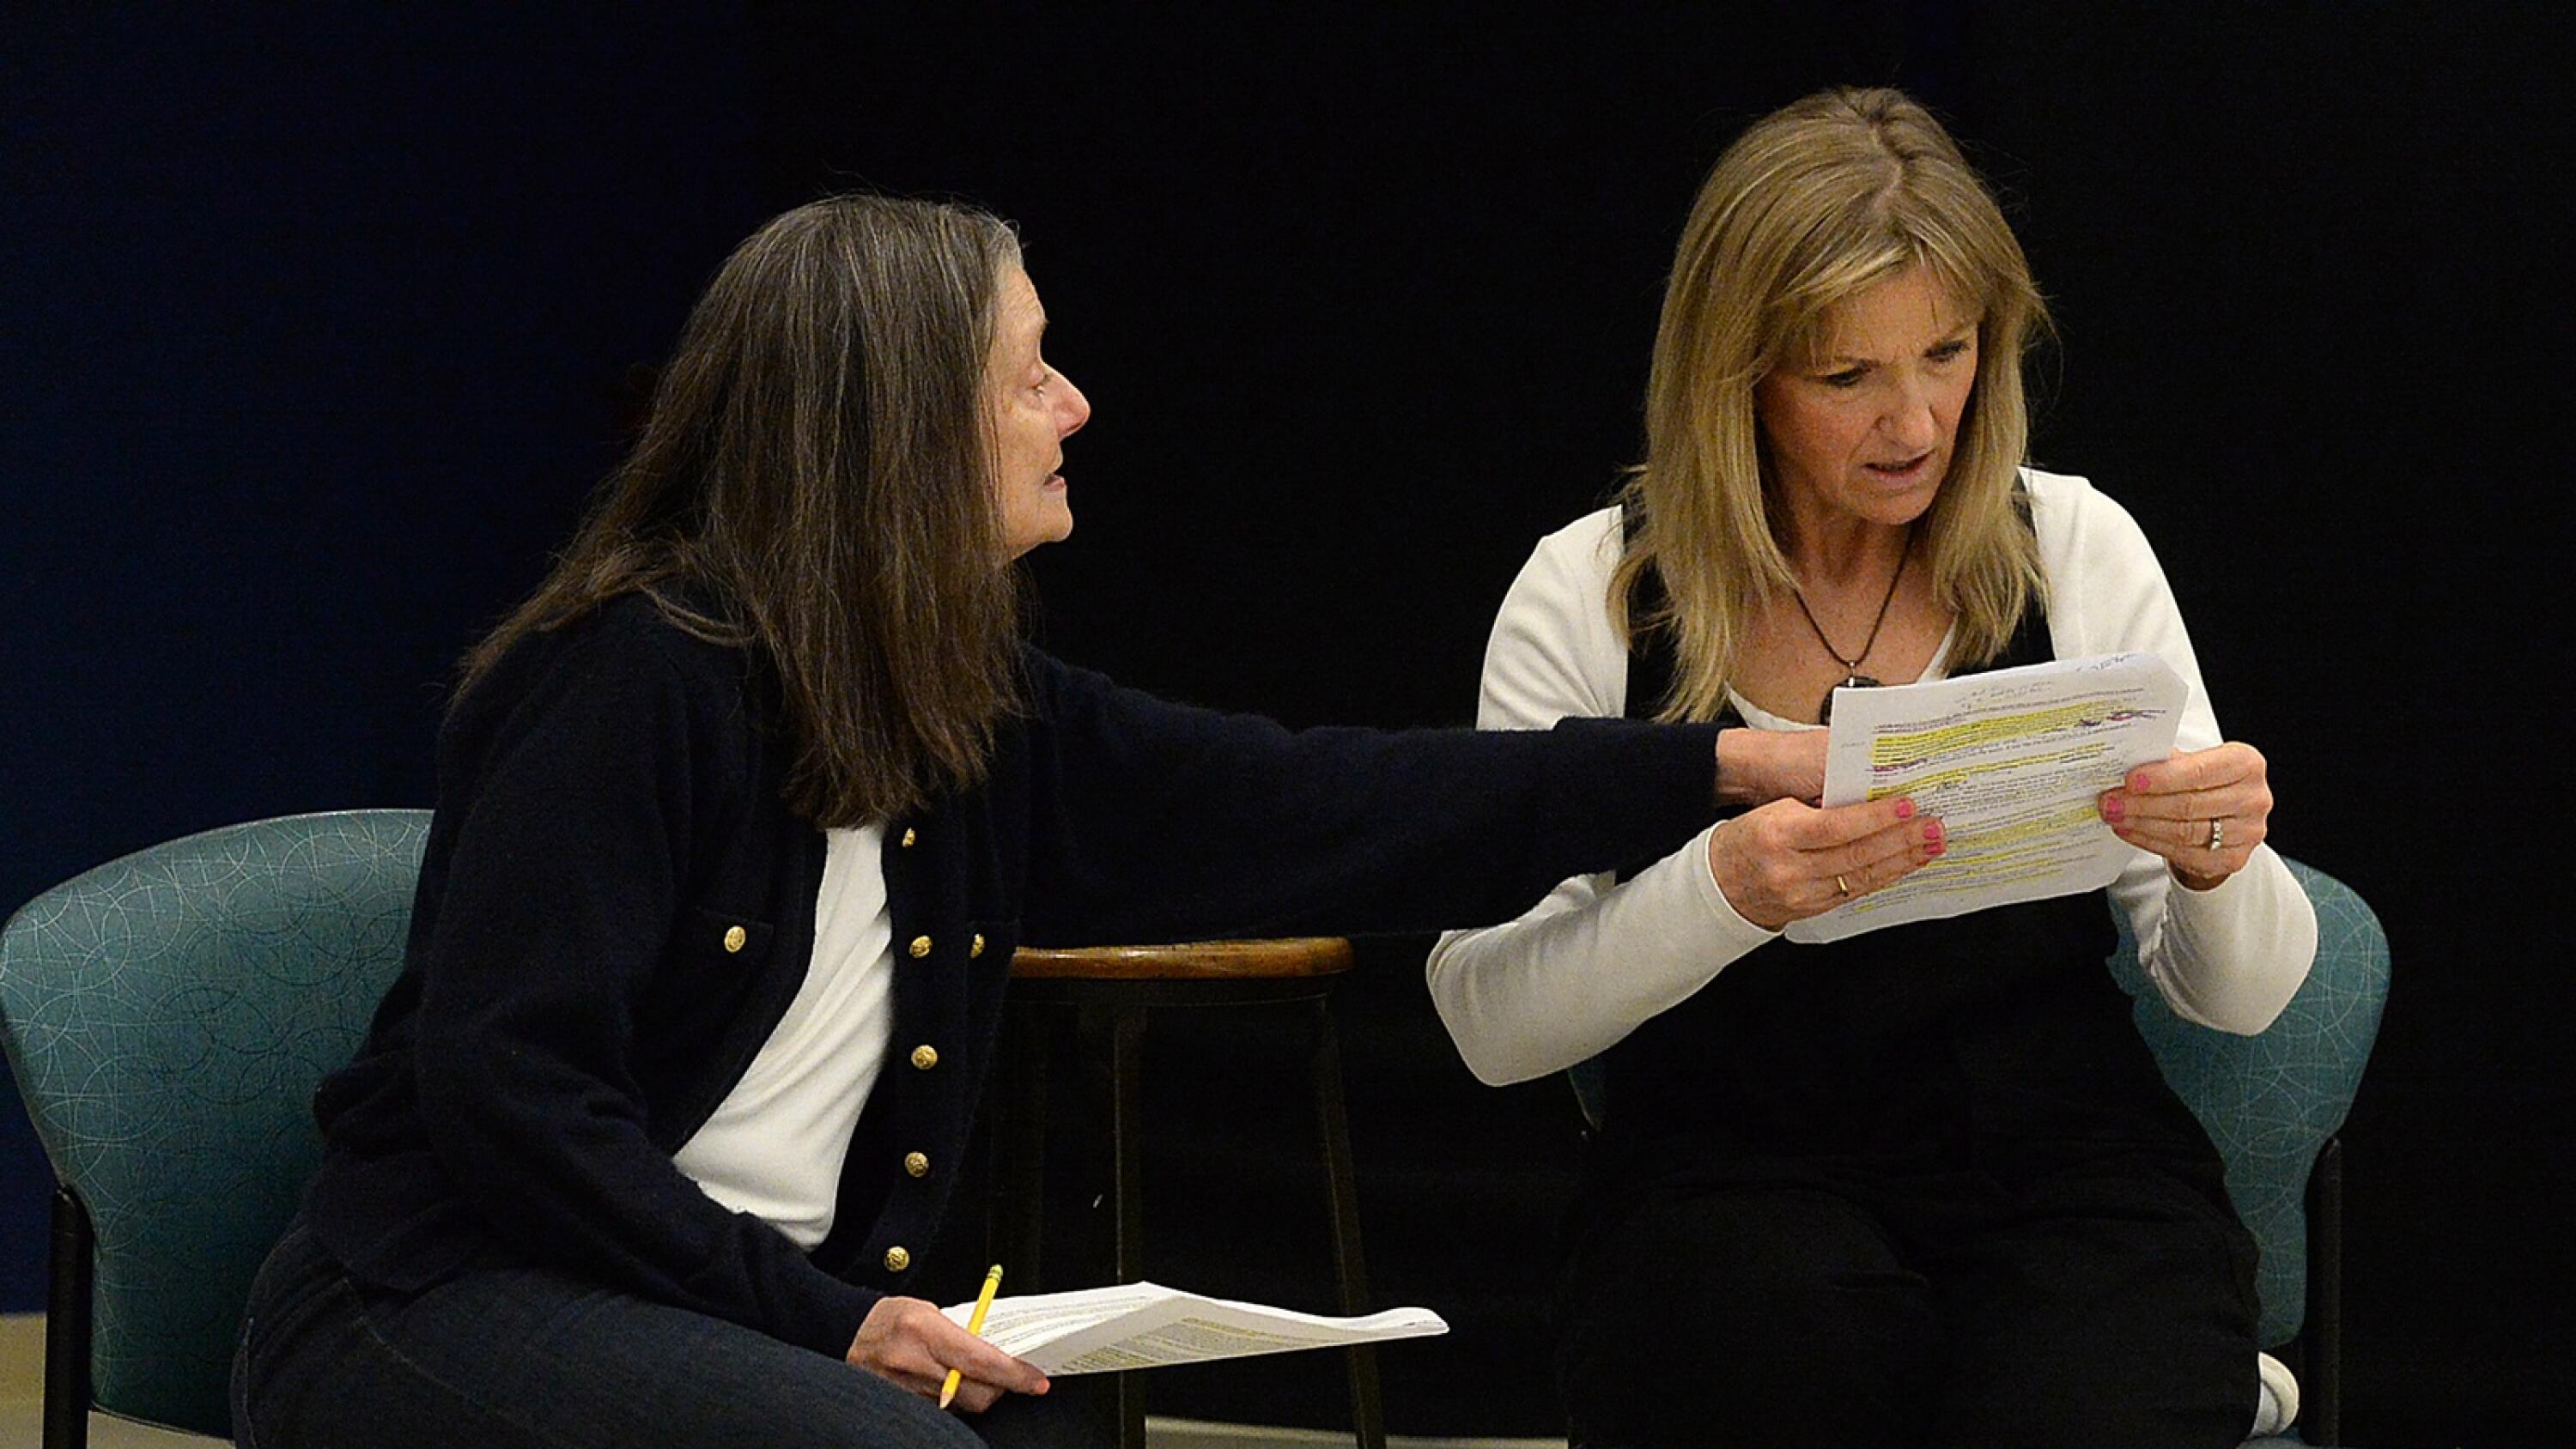 Groton Regional Theatre stages its first play production since the pandemic, and it’s all about moms